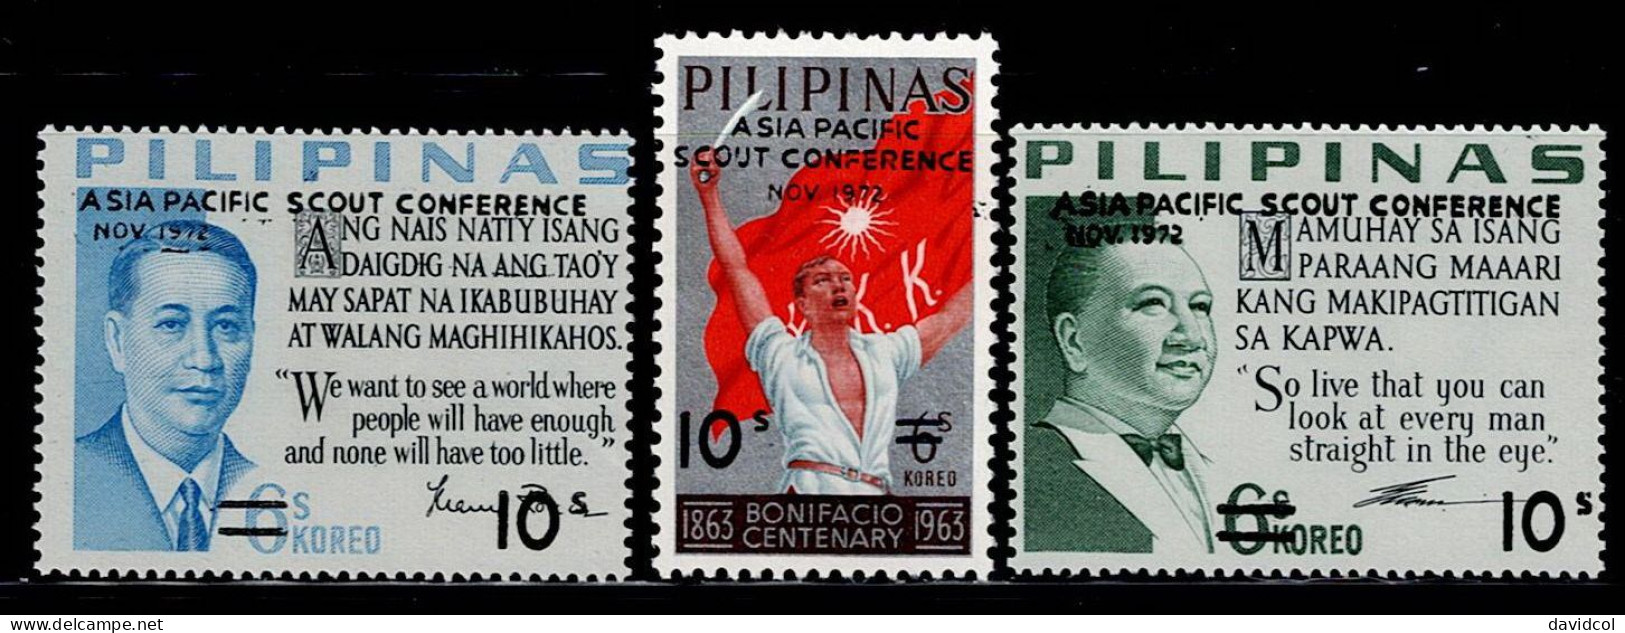 FIL-18- PHILIPPINES - 1972 - MNH -SCOUTS- ASIA-PACIFIC SCOUT CONFERENCE - Philippines